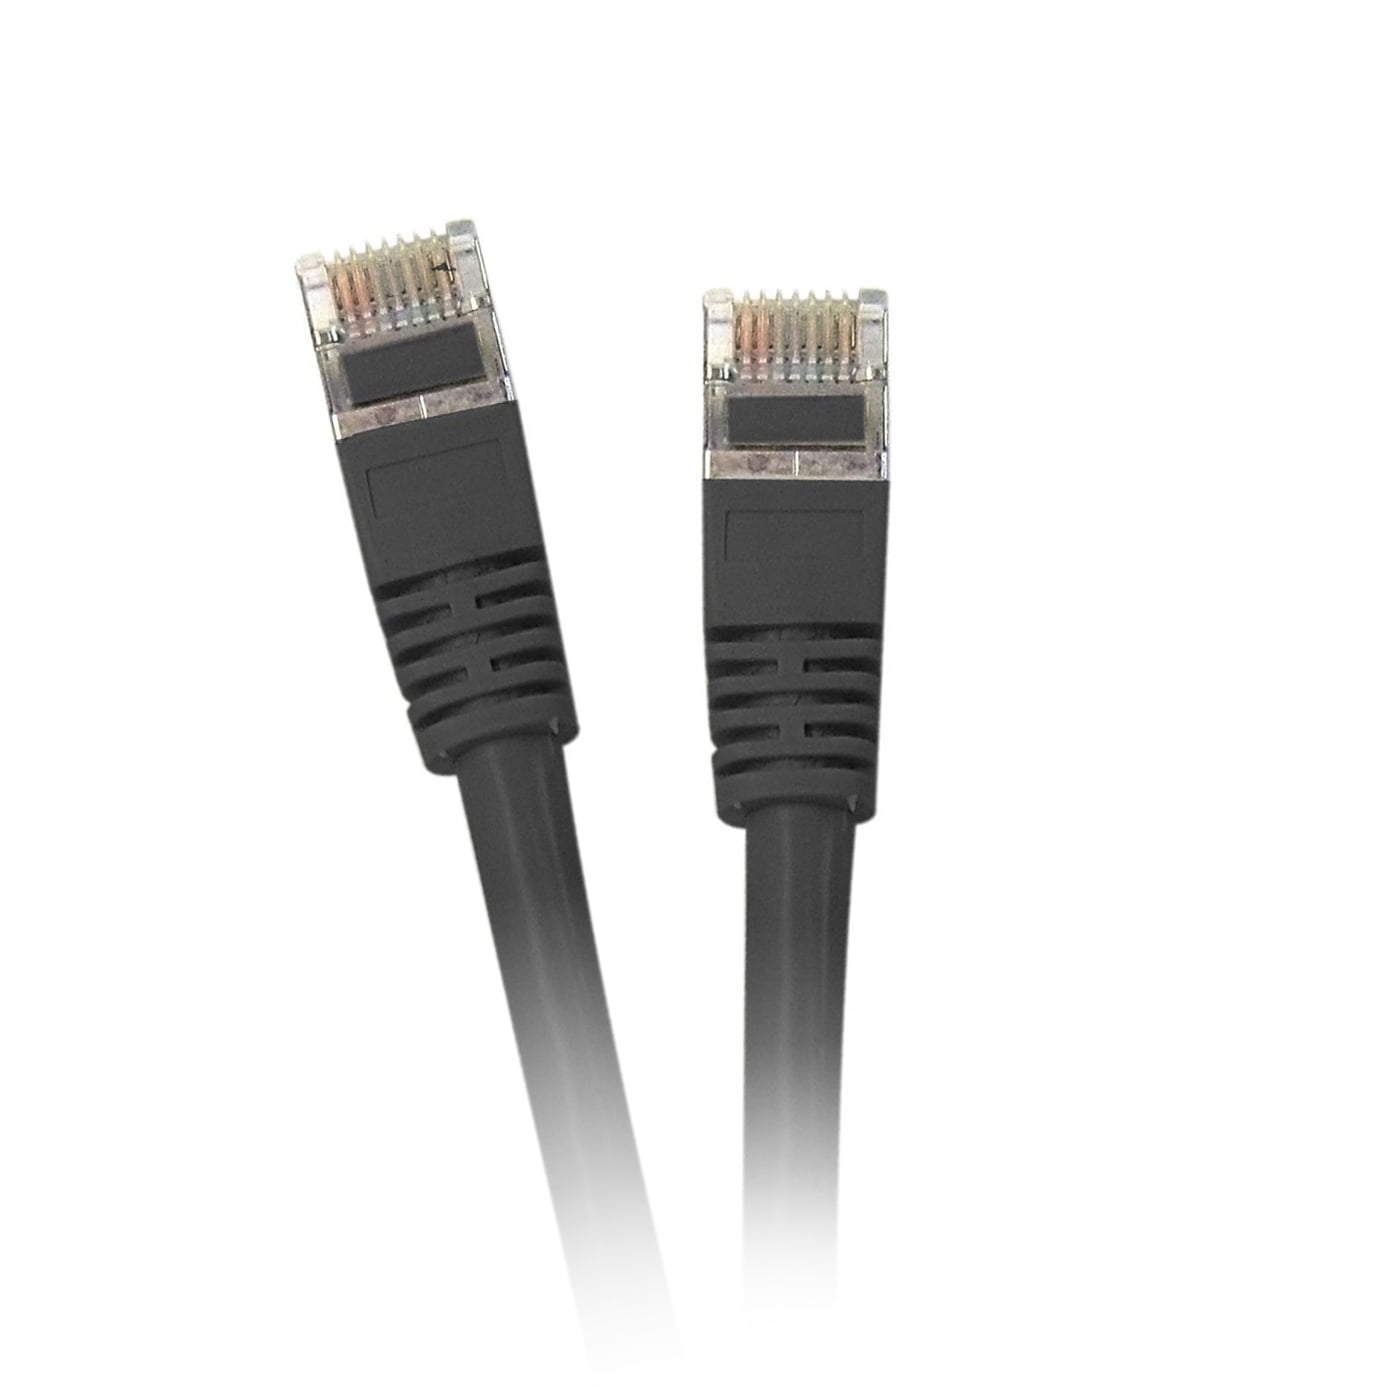 eDragon 10 Cat5e Black Ethernet Patch Cable Snagless/Molded Boot Pack of 1 ED895282 